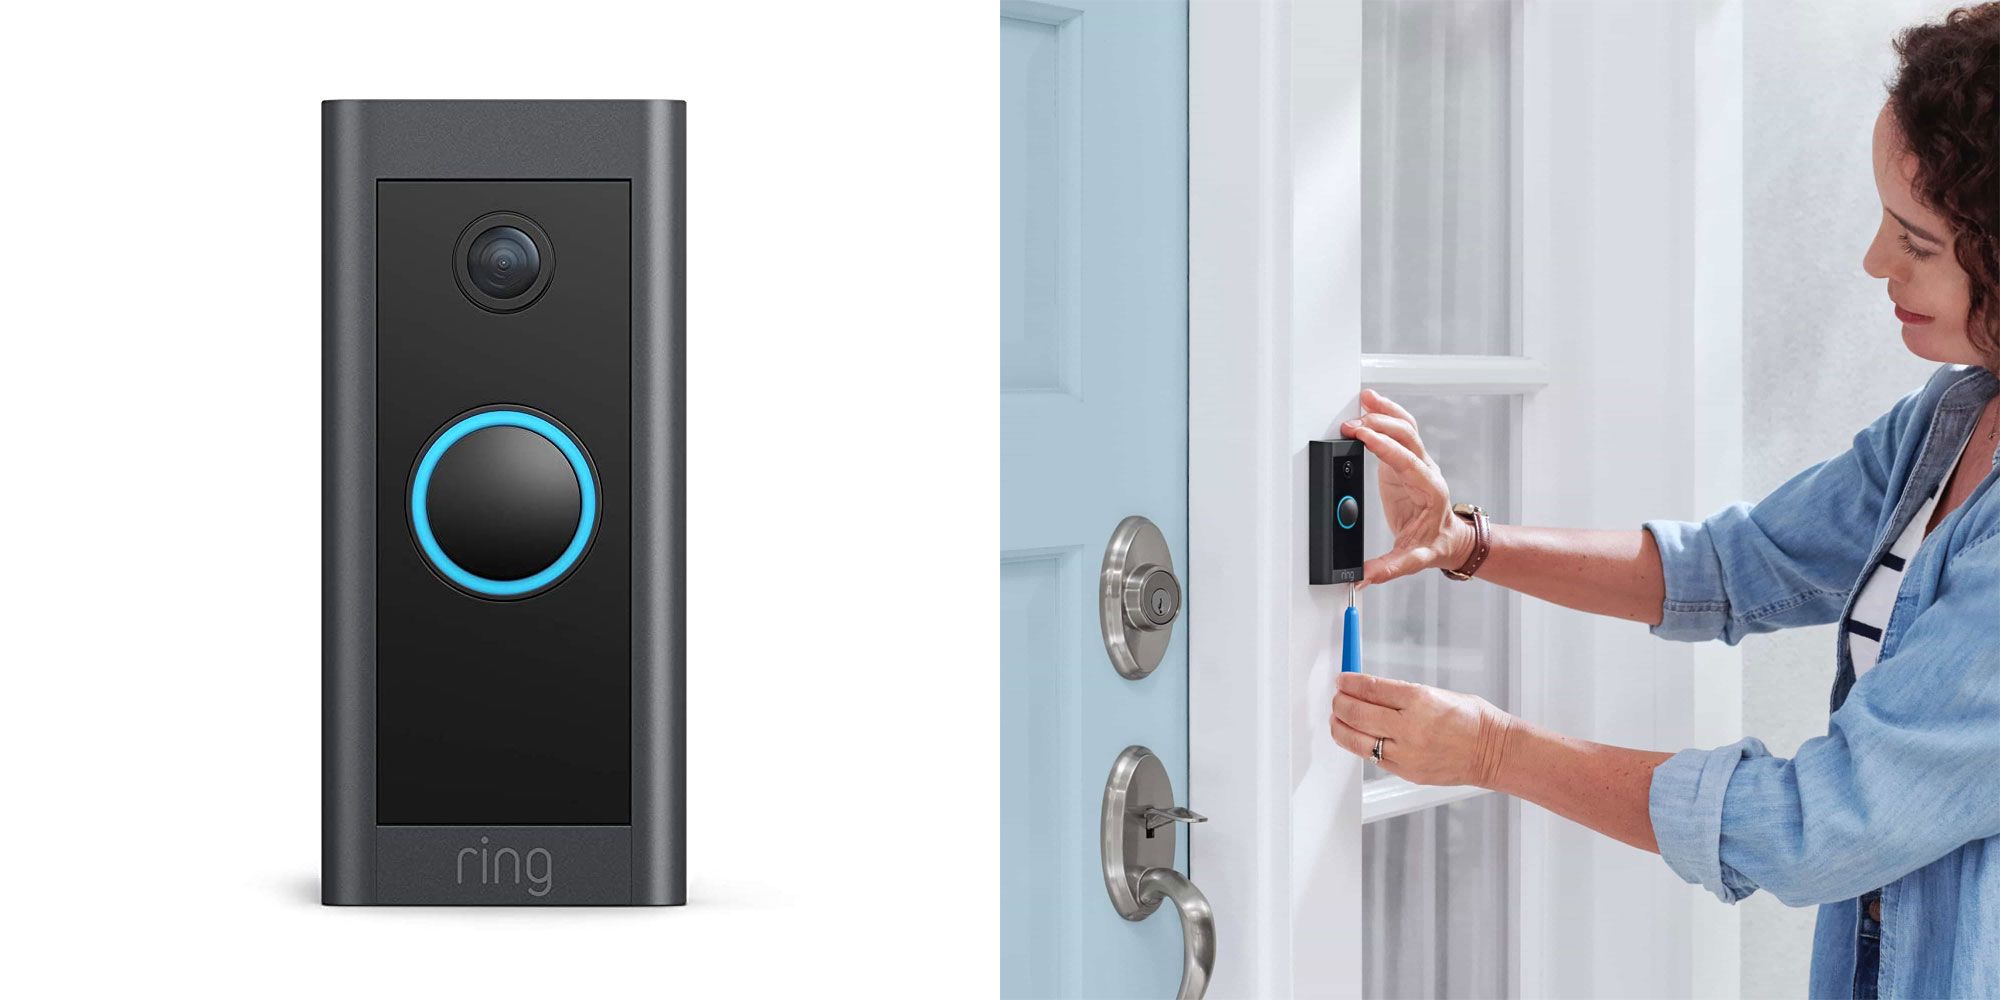 Product images of the Ring Video Doorbell.